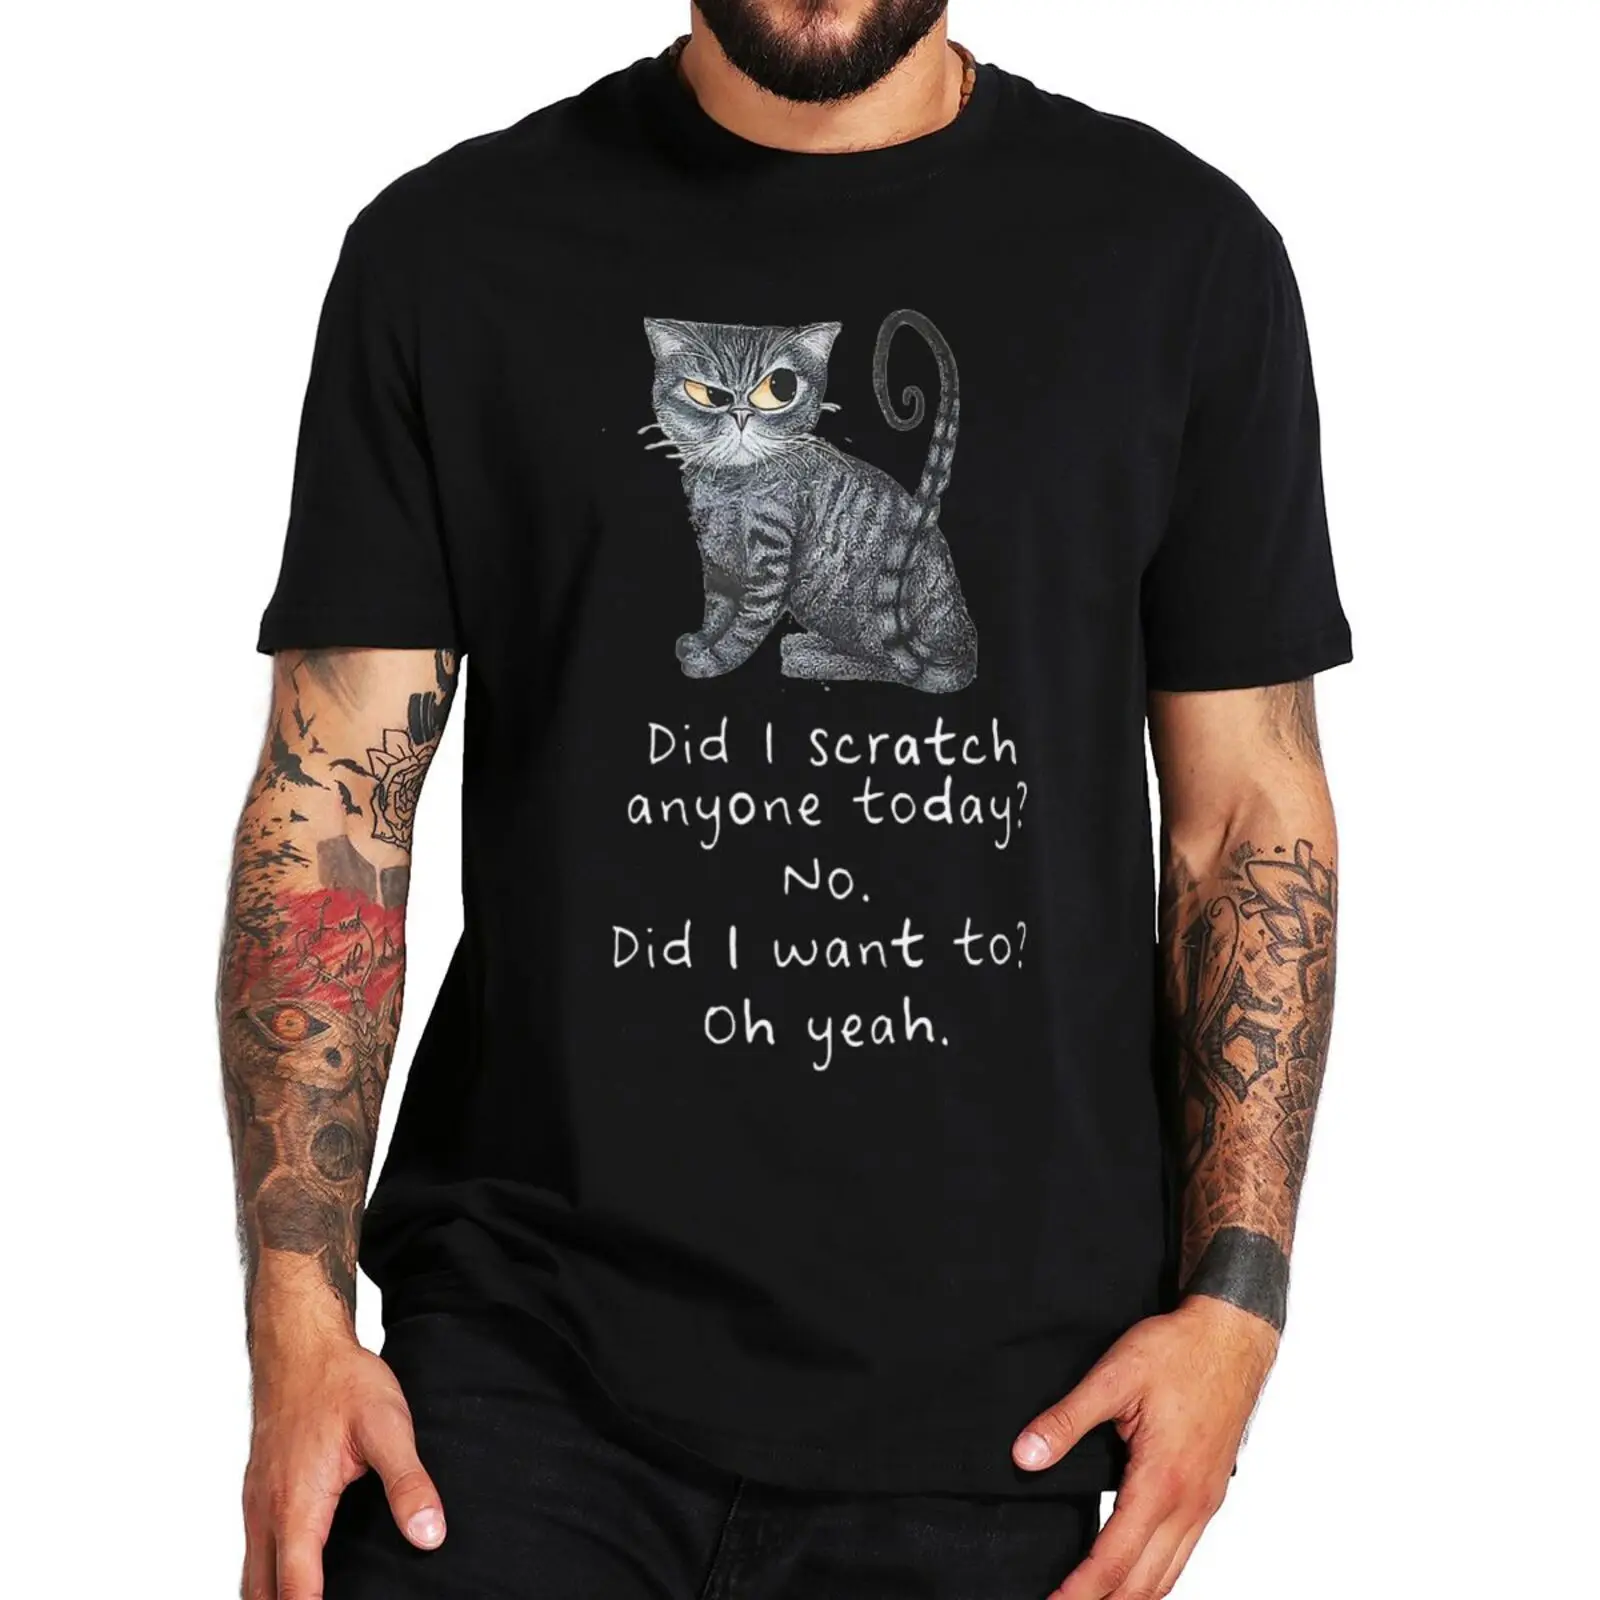 

Sarcastic Cat Have I Scratched Anyone Today T Shirt Black Cat Animal Funny Unisex Tee Shirt 100% Cotton Soft Men's Clothing